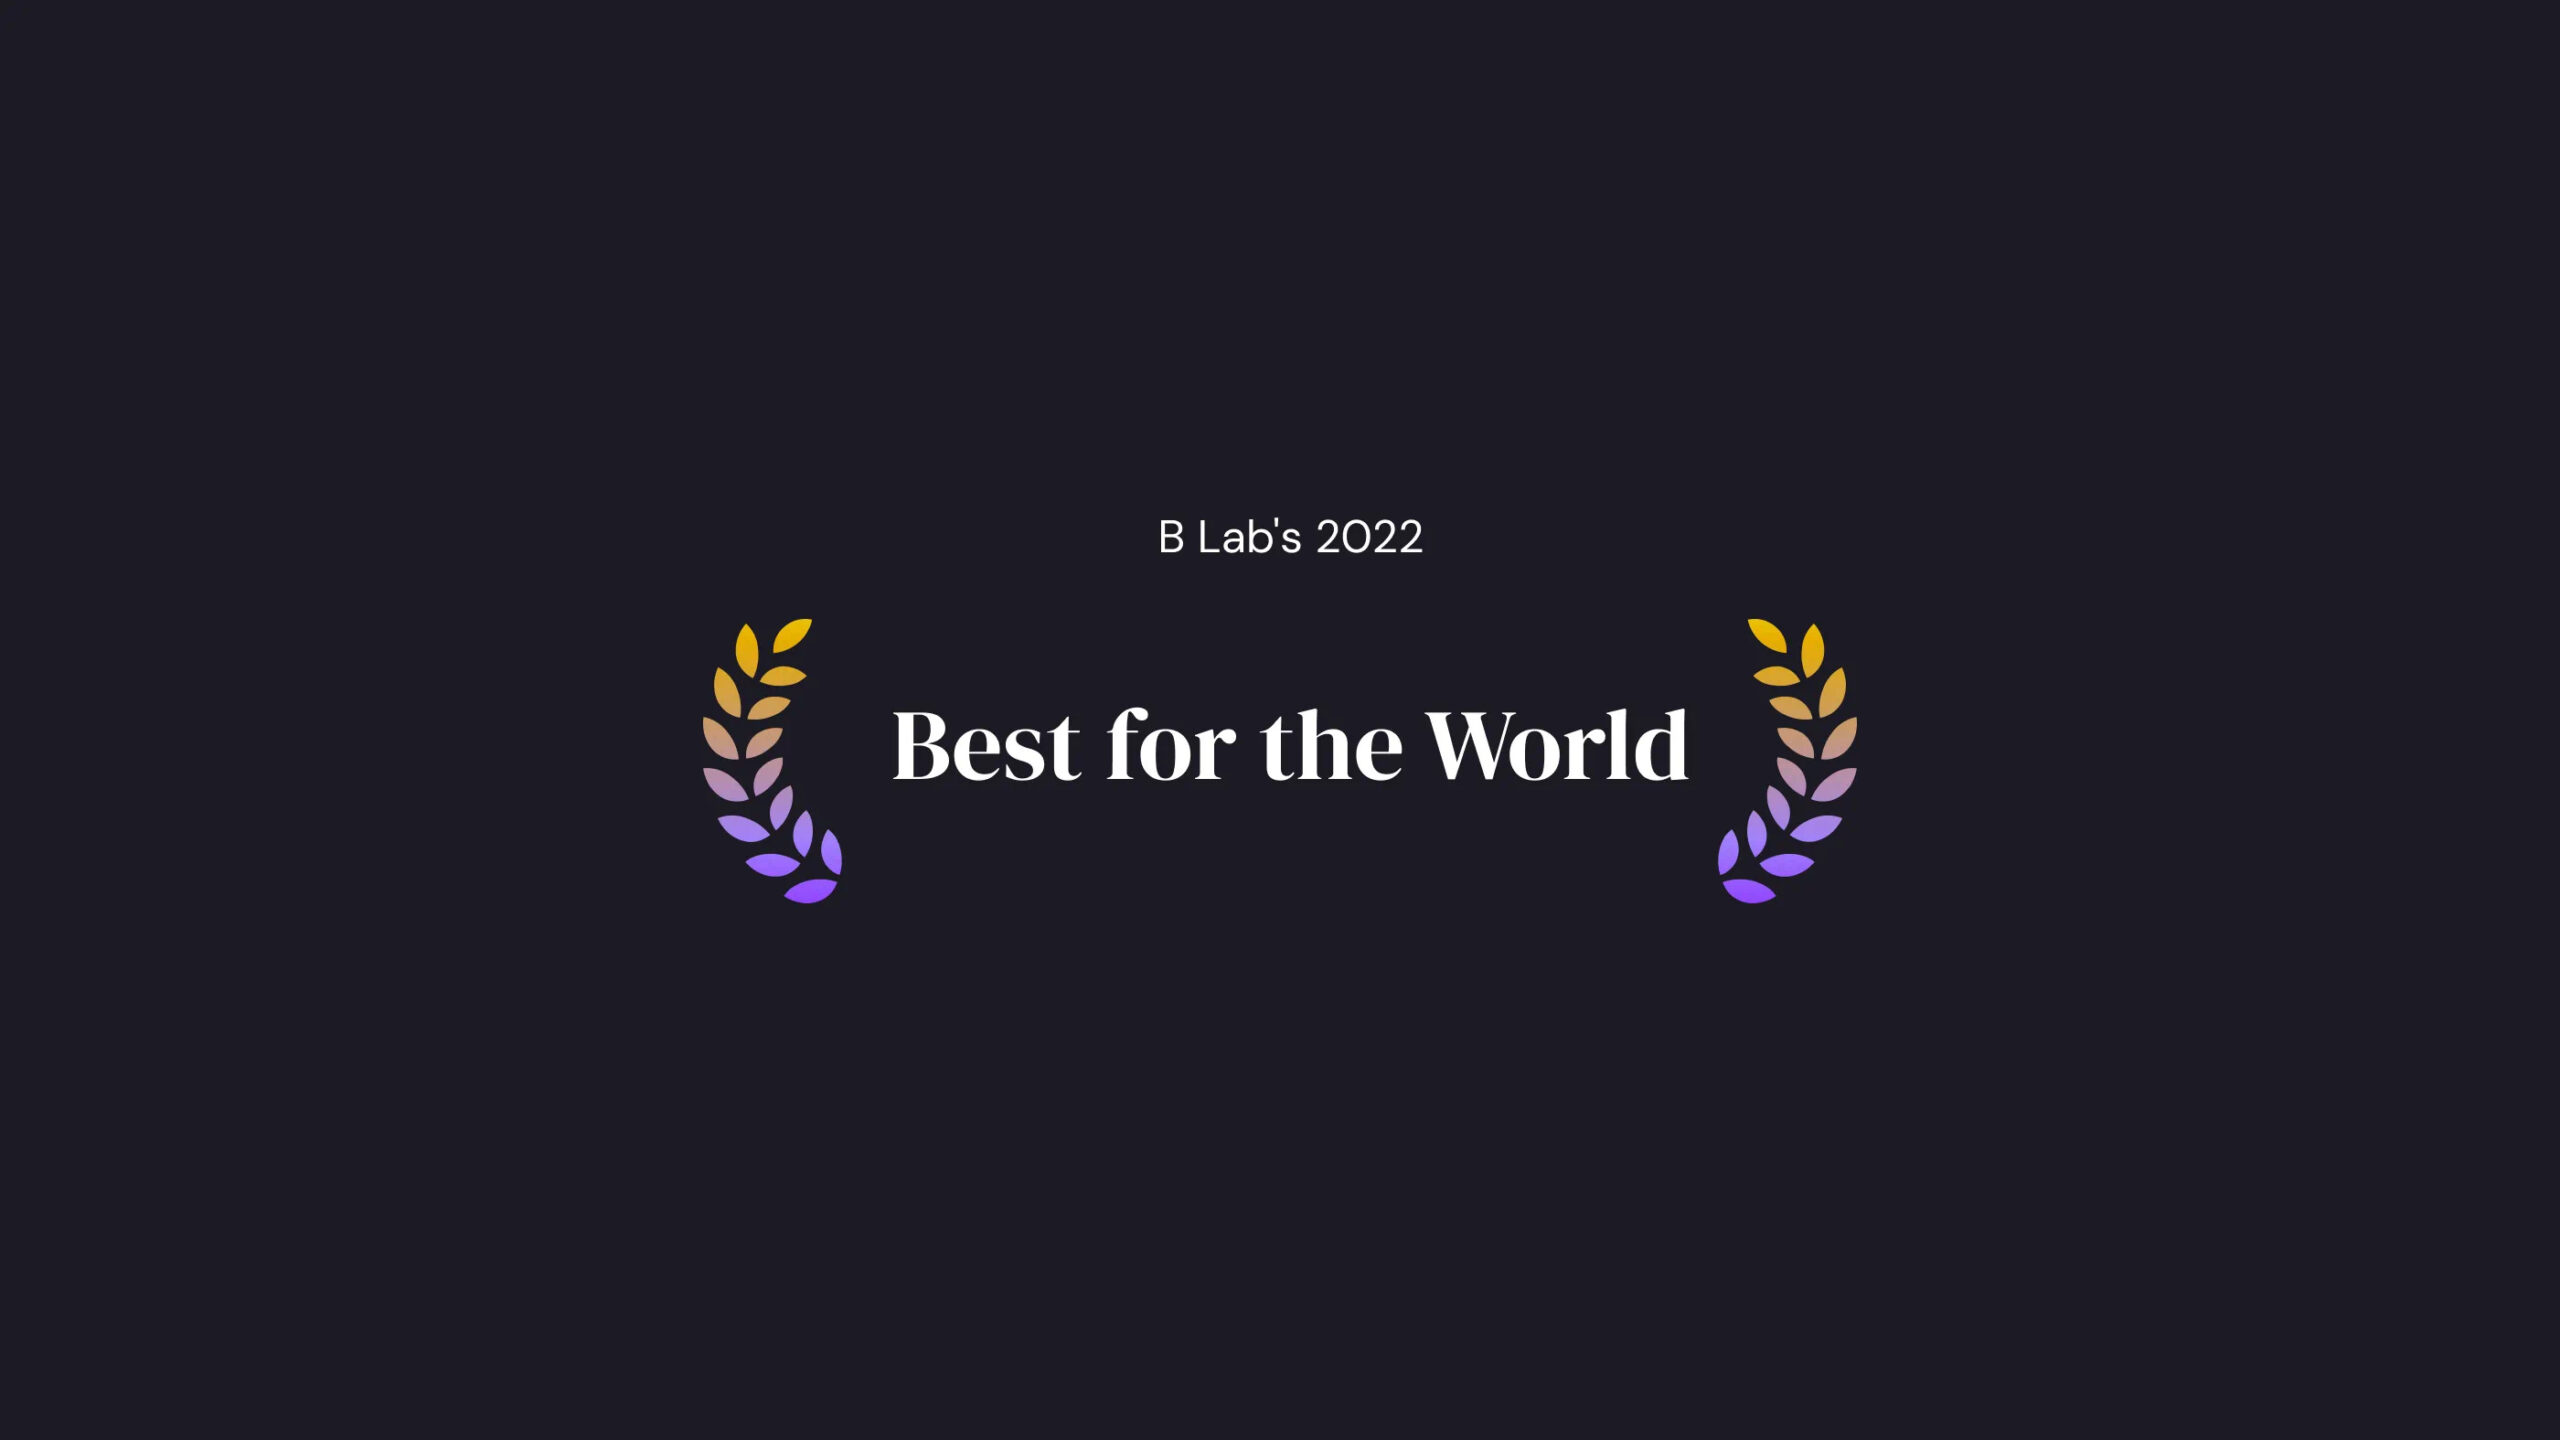 https://frakton.com/kincarta-recognized-as-a-2022-best-for-the-world-for-exceptional-impact-on-governance/